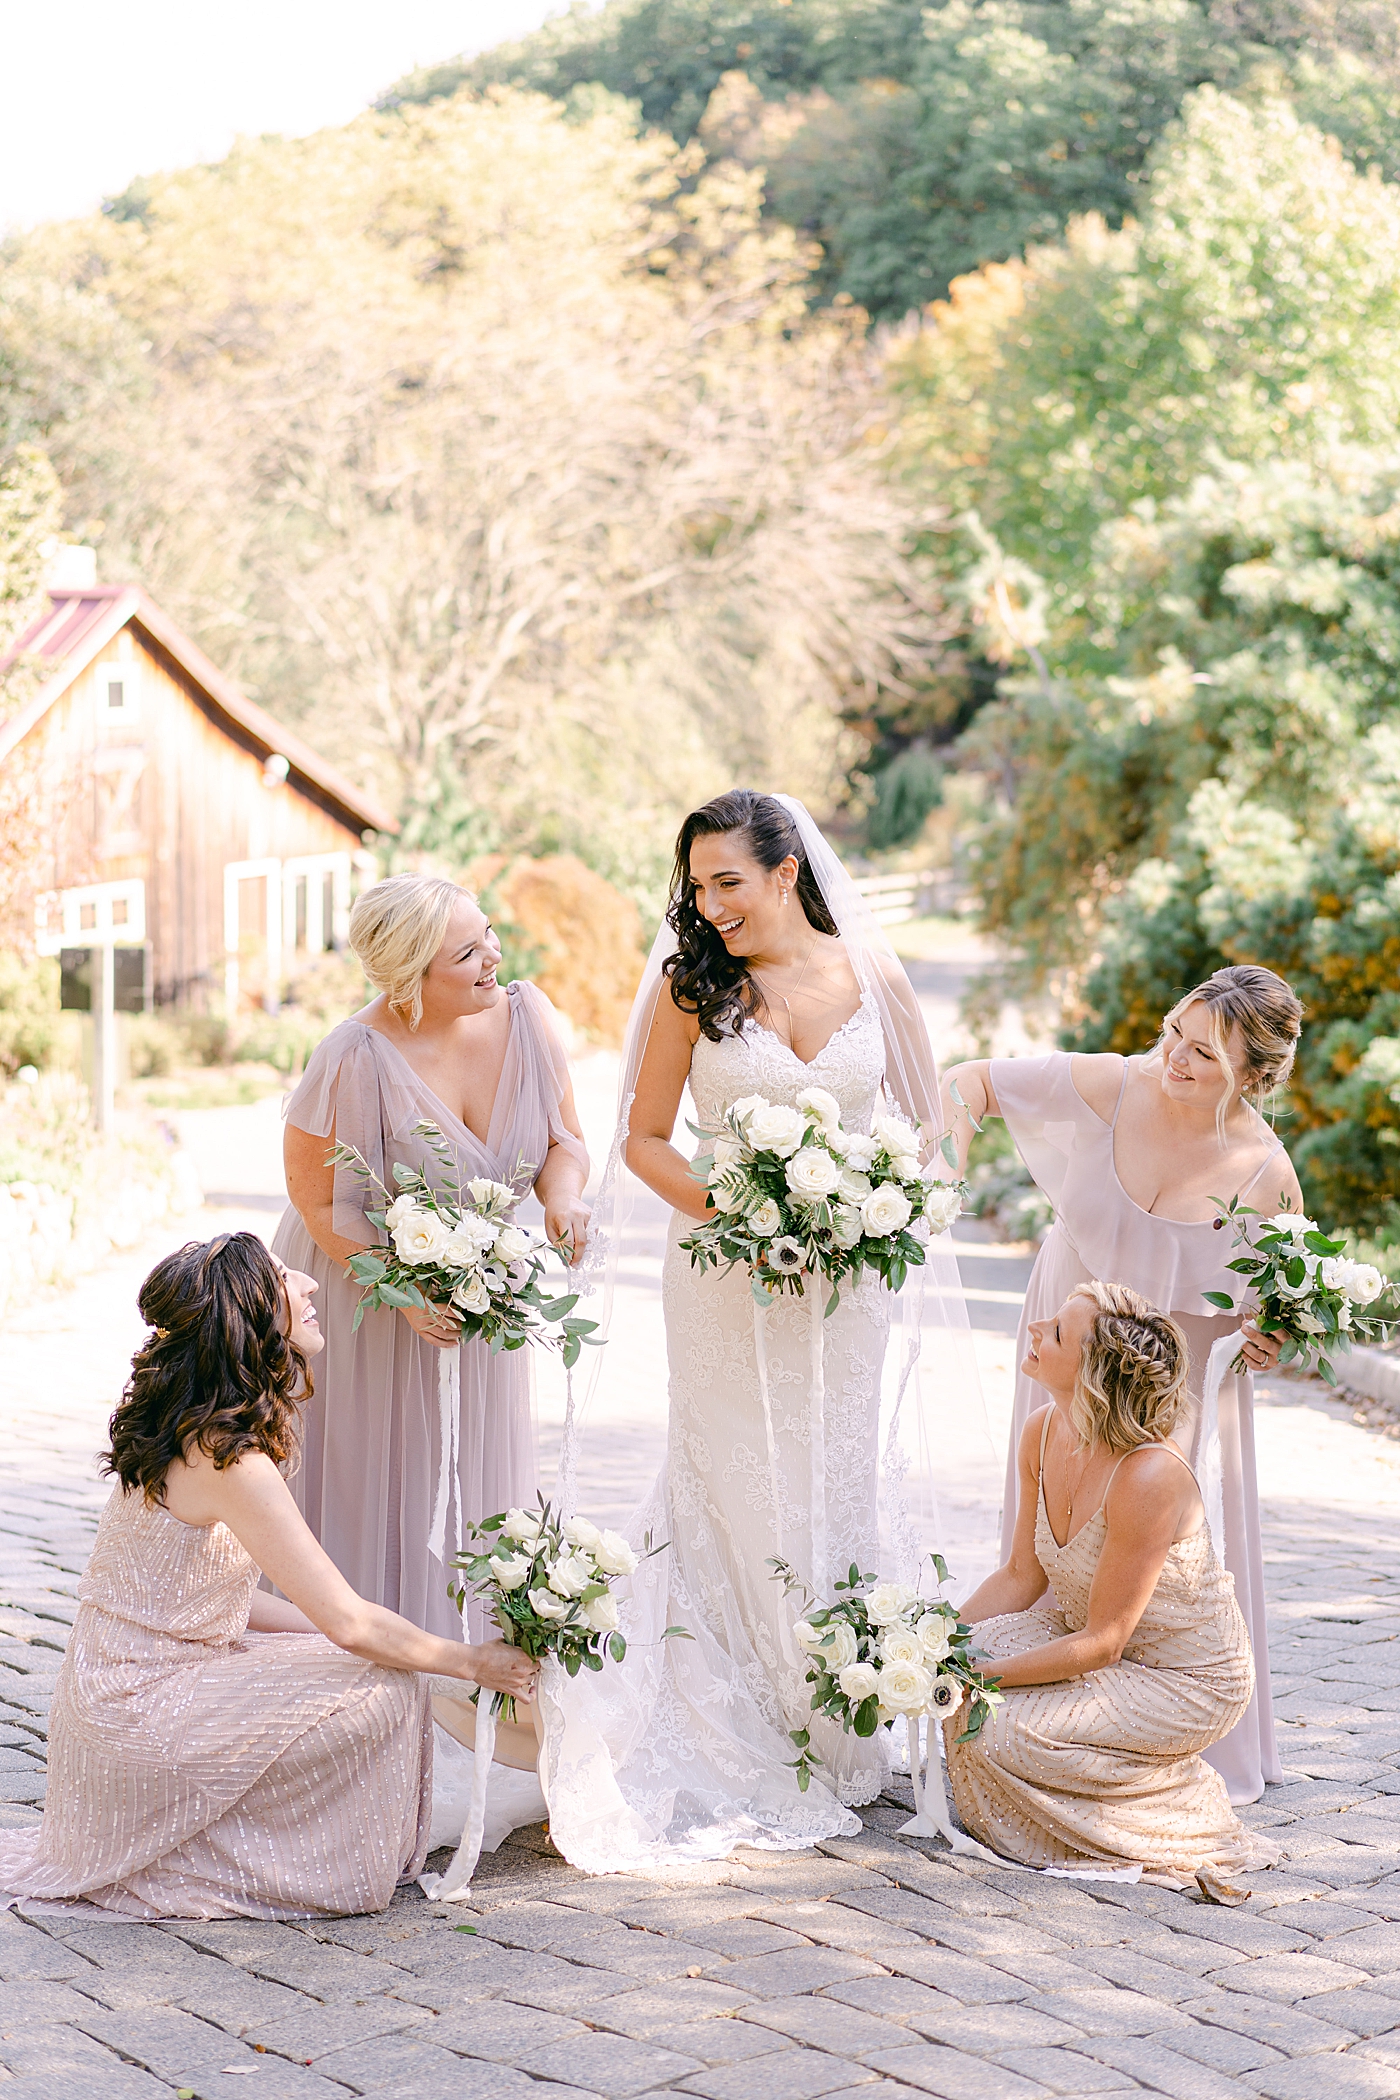 Bridesmaids adjusting brides dress | Photo by Hope Helmuth Photography